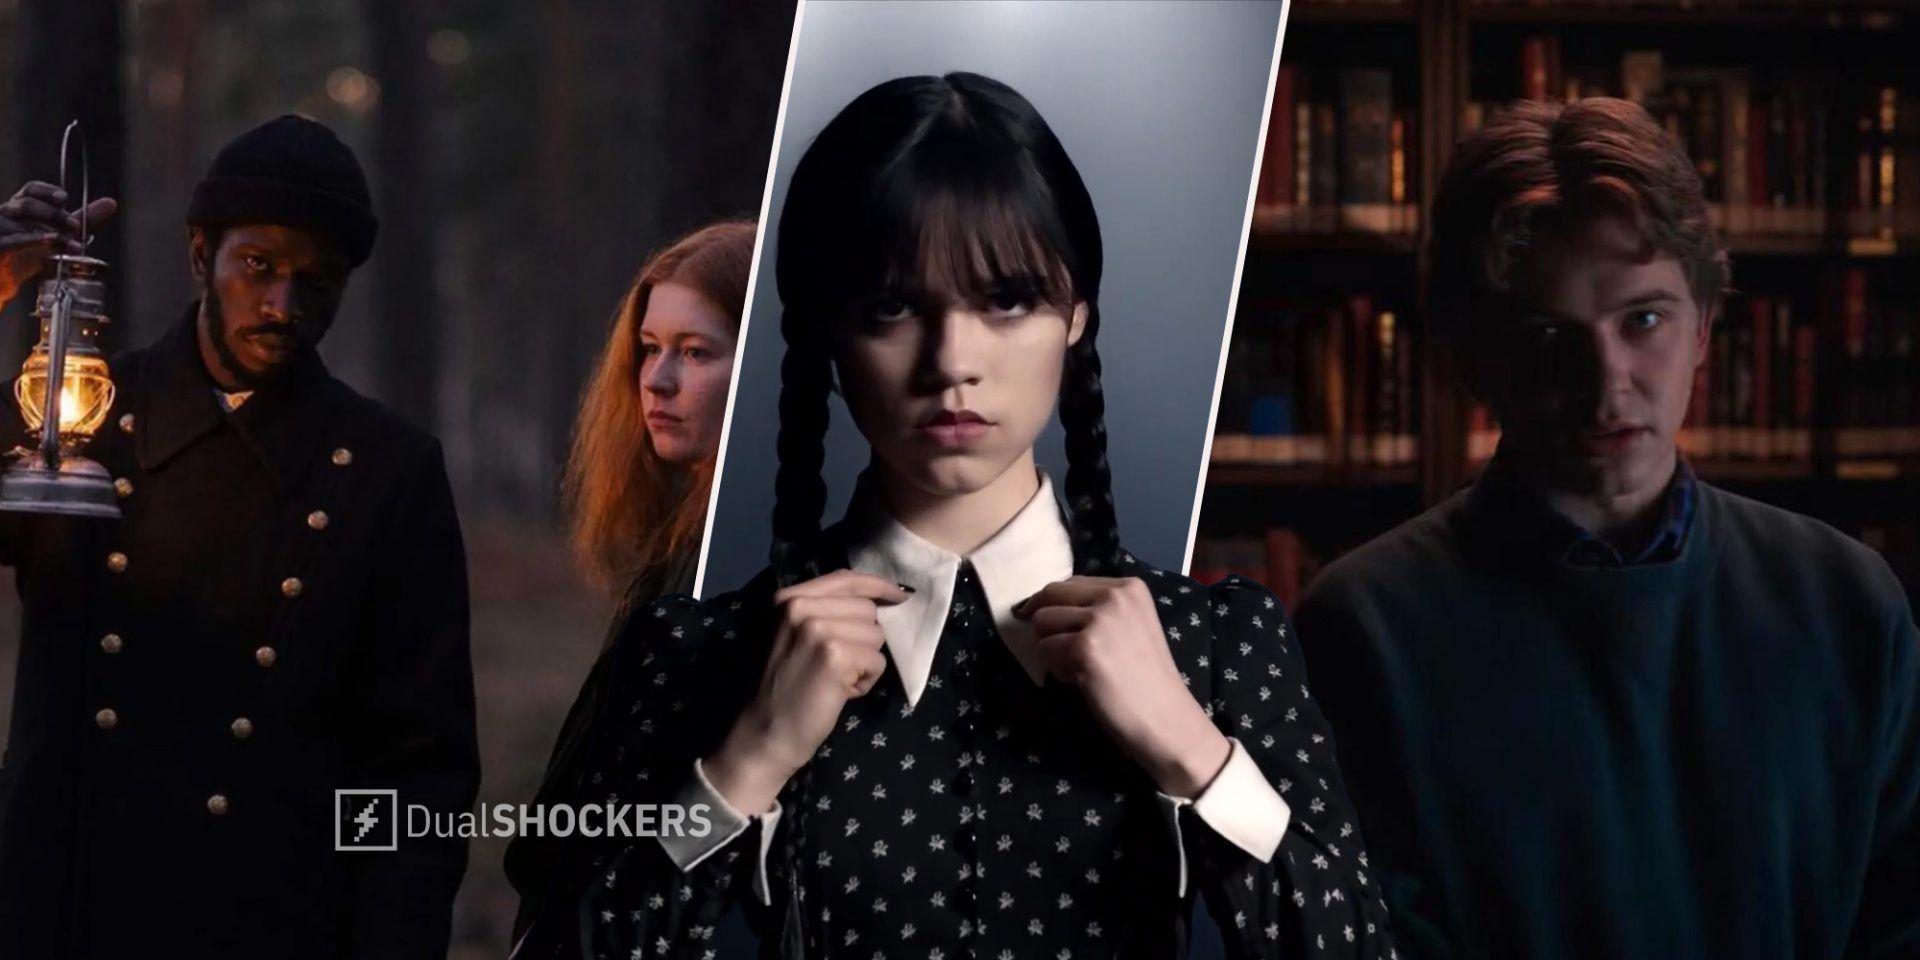 1899 Netflix show two characters with lantern in forest on left, Wednesday show Wednesday Addams in middle, The Midnight Club character in library on right